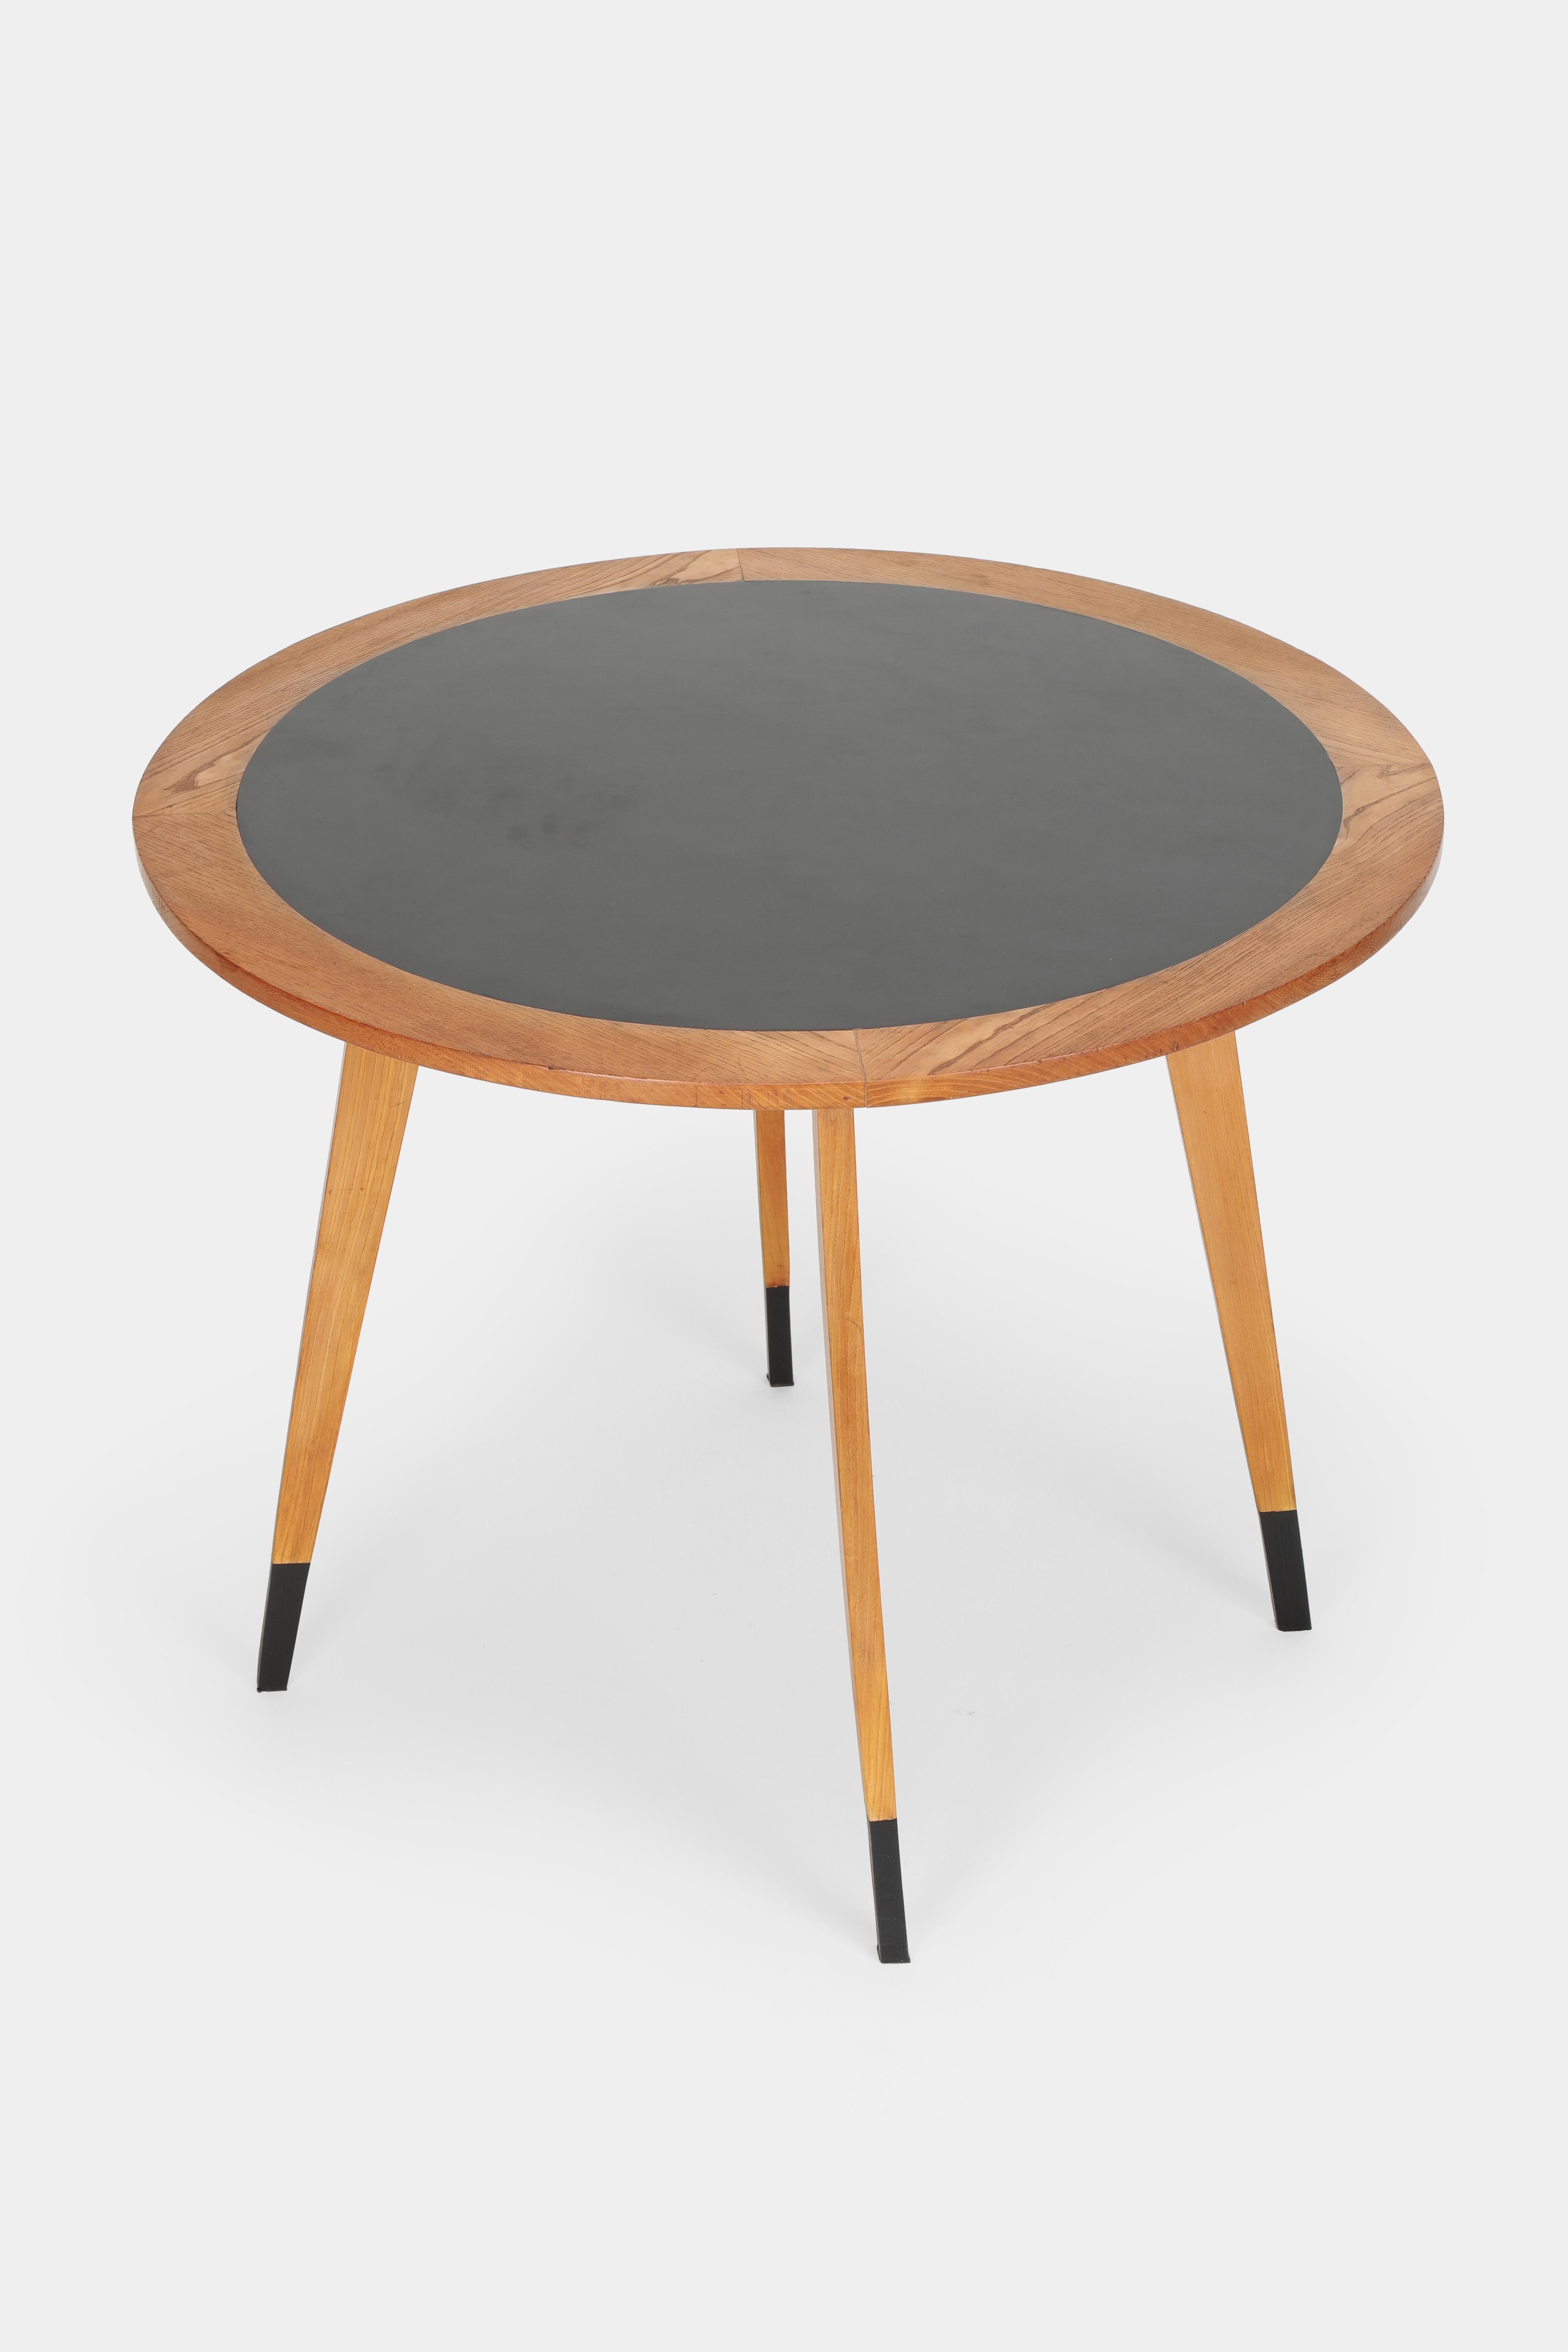 Dining table manufactured by Wohnbedarf Jehle in the 1960s in Switzerland, Basel. Black formica surrounded by solid oakwood. Four conical legs, extended with 10 cm black lacquered tips.

 